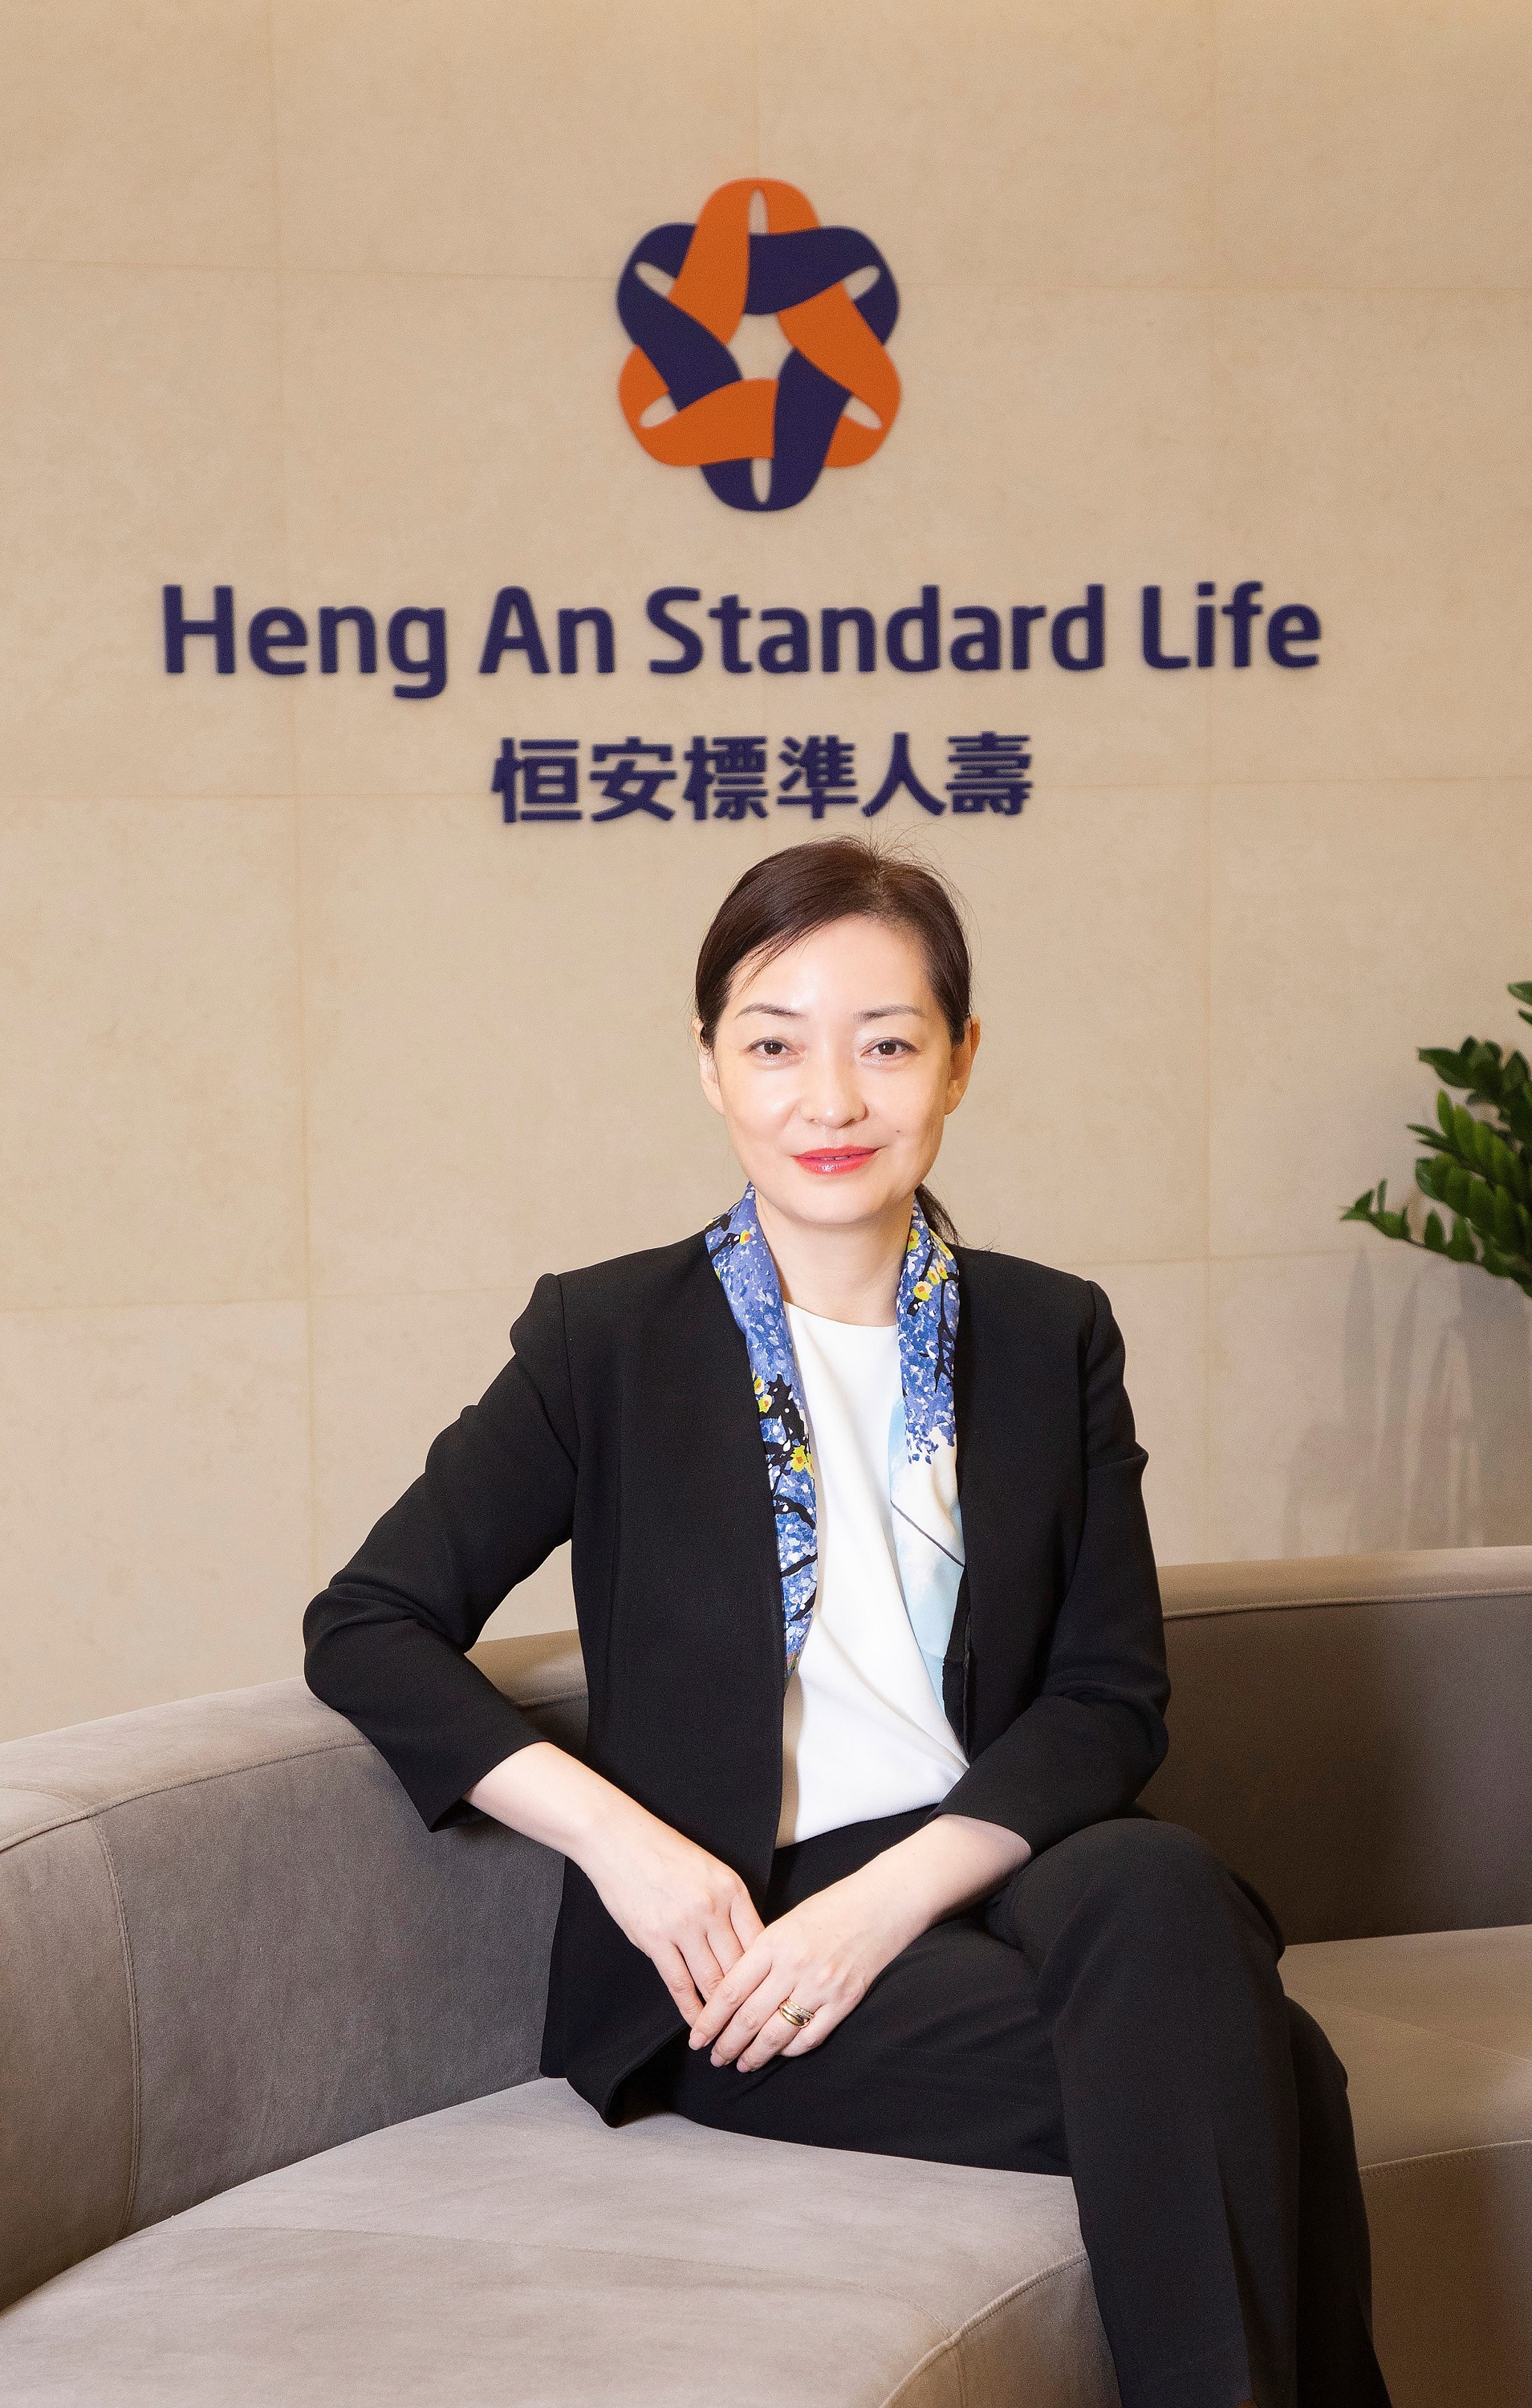 Olivia Liu, Chief Executive of HASL Asia, welcomes and fully supports the new CIES introduced in Hong Kong to enhance the city